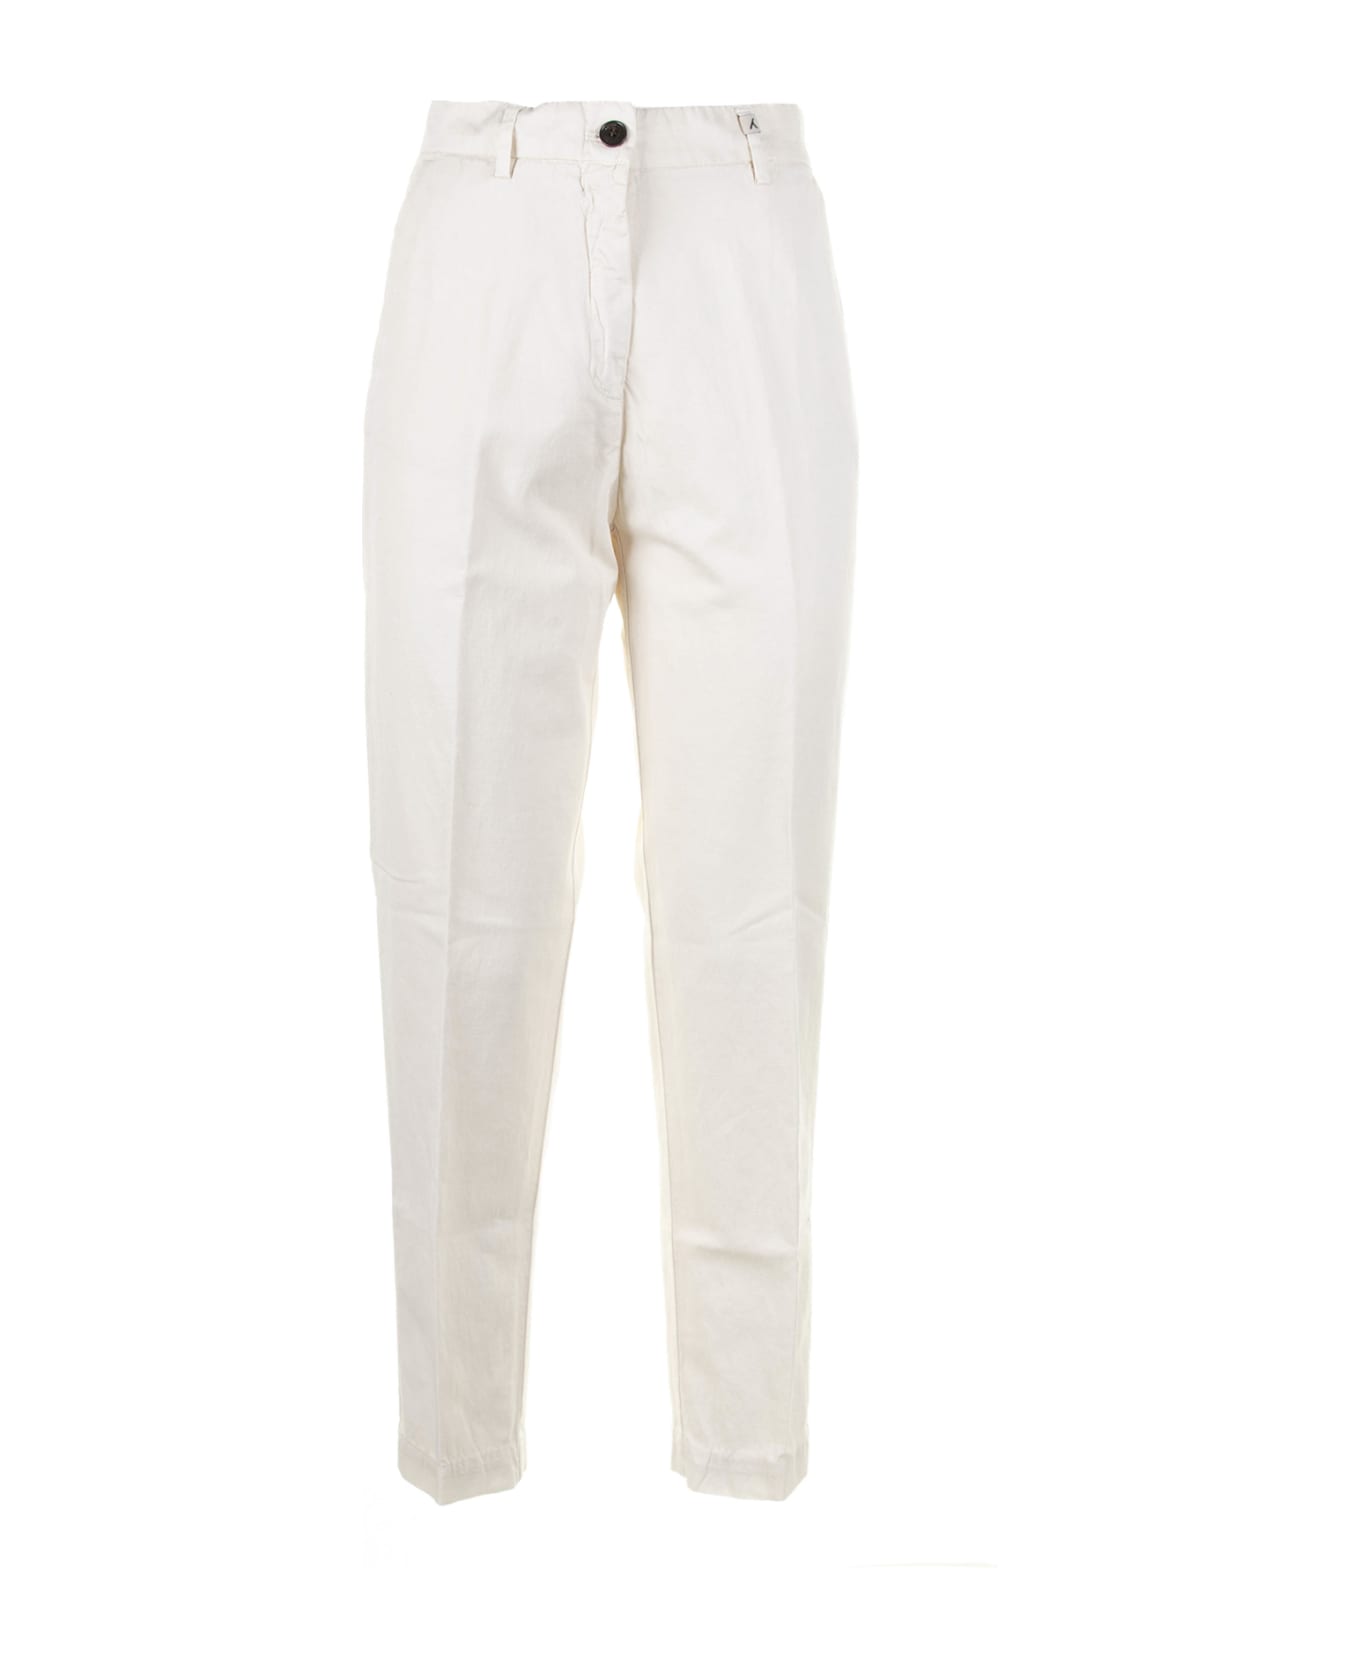 Myths White High-waisted Trousers - OFF WHITE